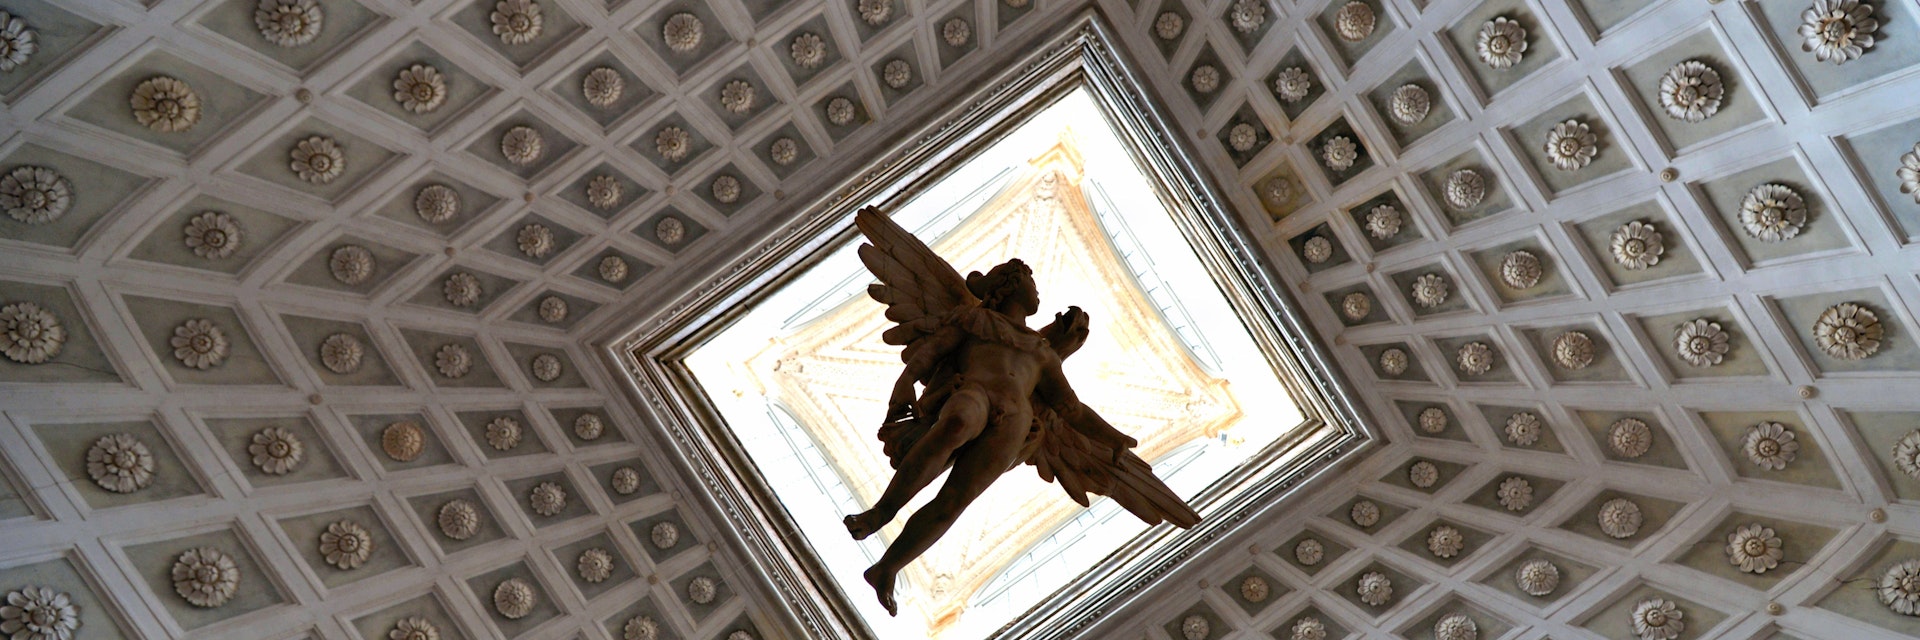 Venice, Italy 02.12.2018. detail of interior in historical Palazzo Grimani building with flying angel statue and wall decorations build in 1556; Shutterstock ID 1287835957; purchase_order: 65050; job: poi; client: ; other:
1287835957